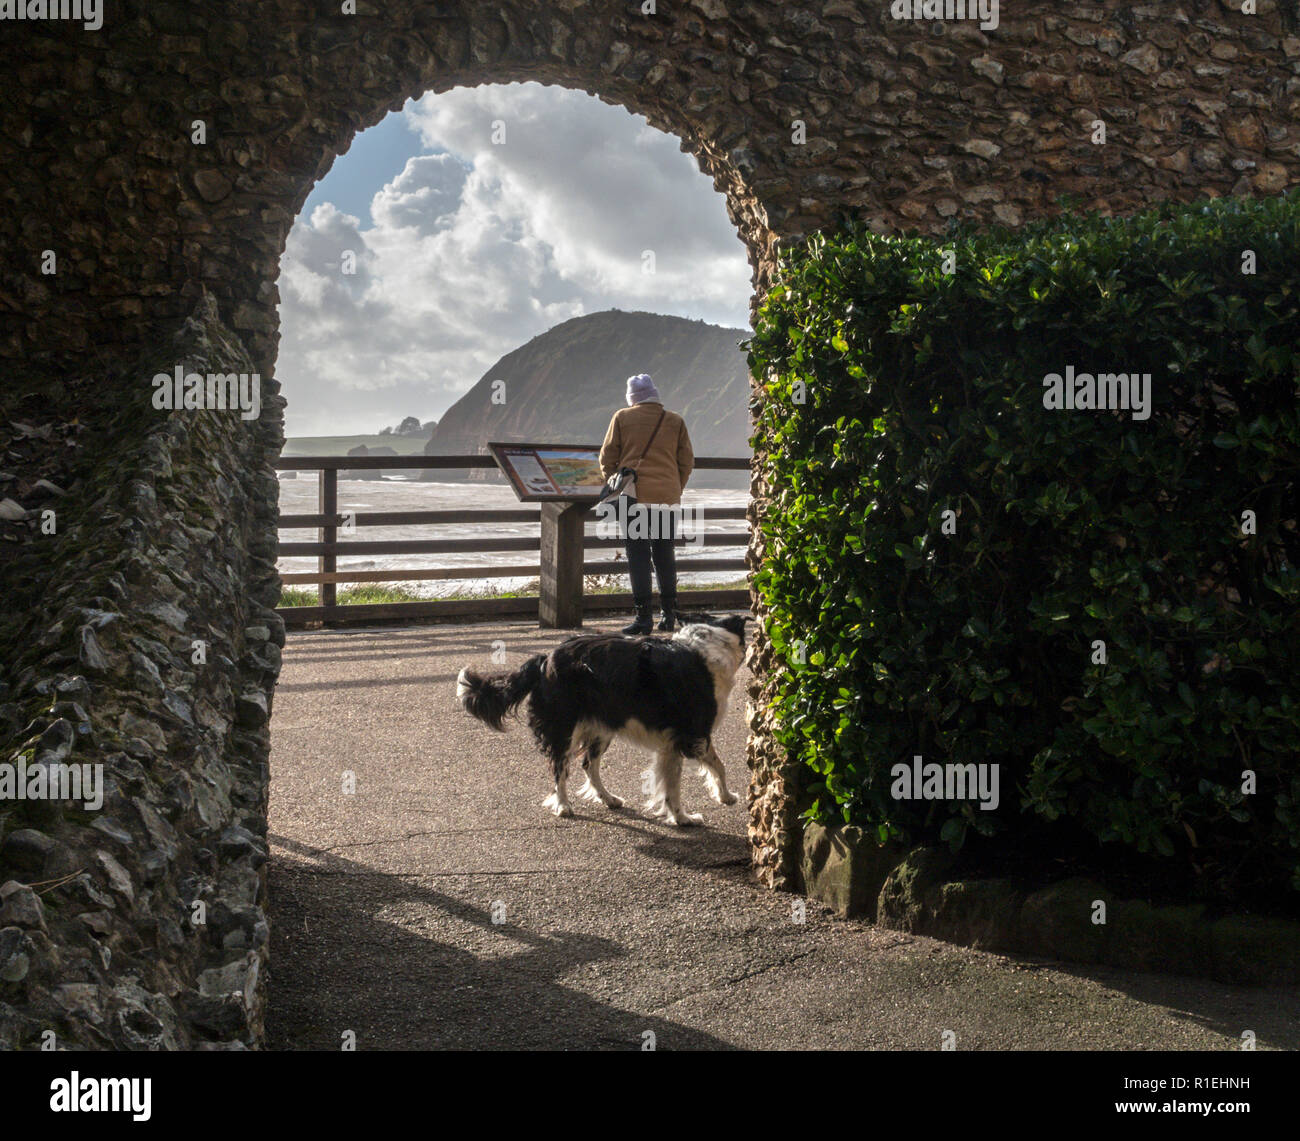 A woman looks out towards High Peak from Connaught Gardens in Sidmouth, Devon. Stock Photo